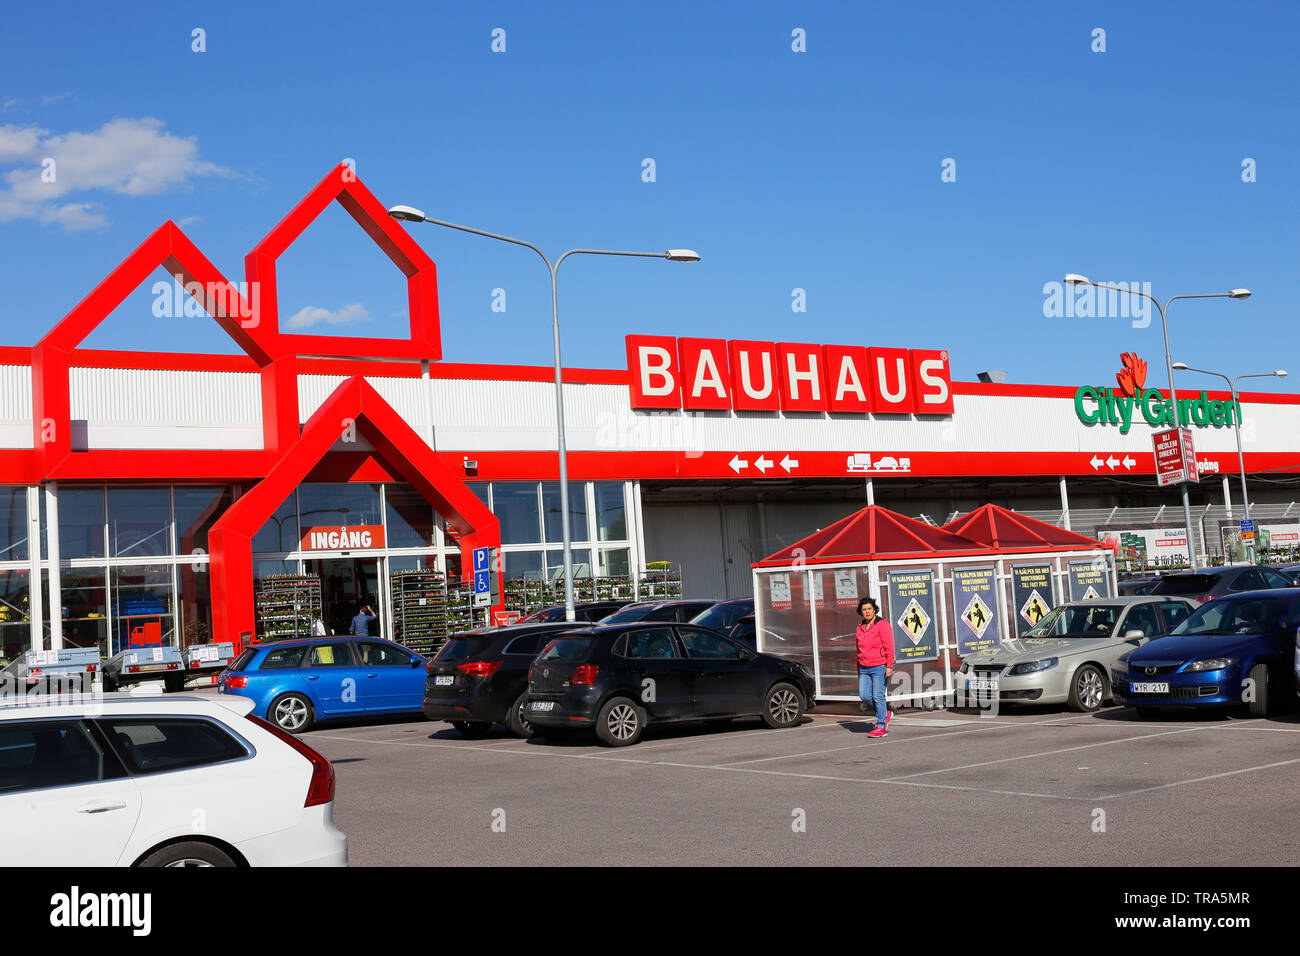 Stockholm, Sweden - May 31, 2019: Exterior view of the Bauhaus retail store  located in Bromma offering products for home improvement, gardening and wo  Stock Photo - Alamy